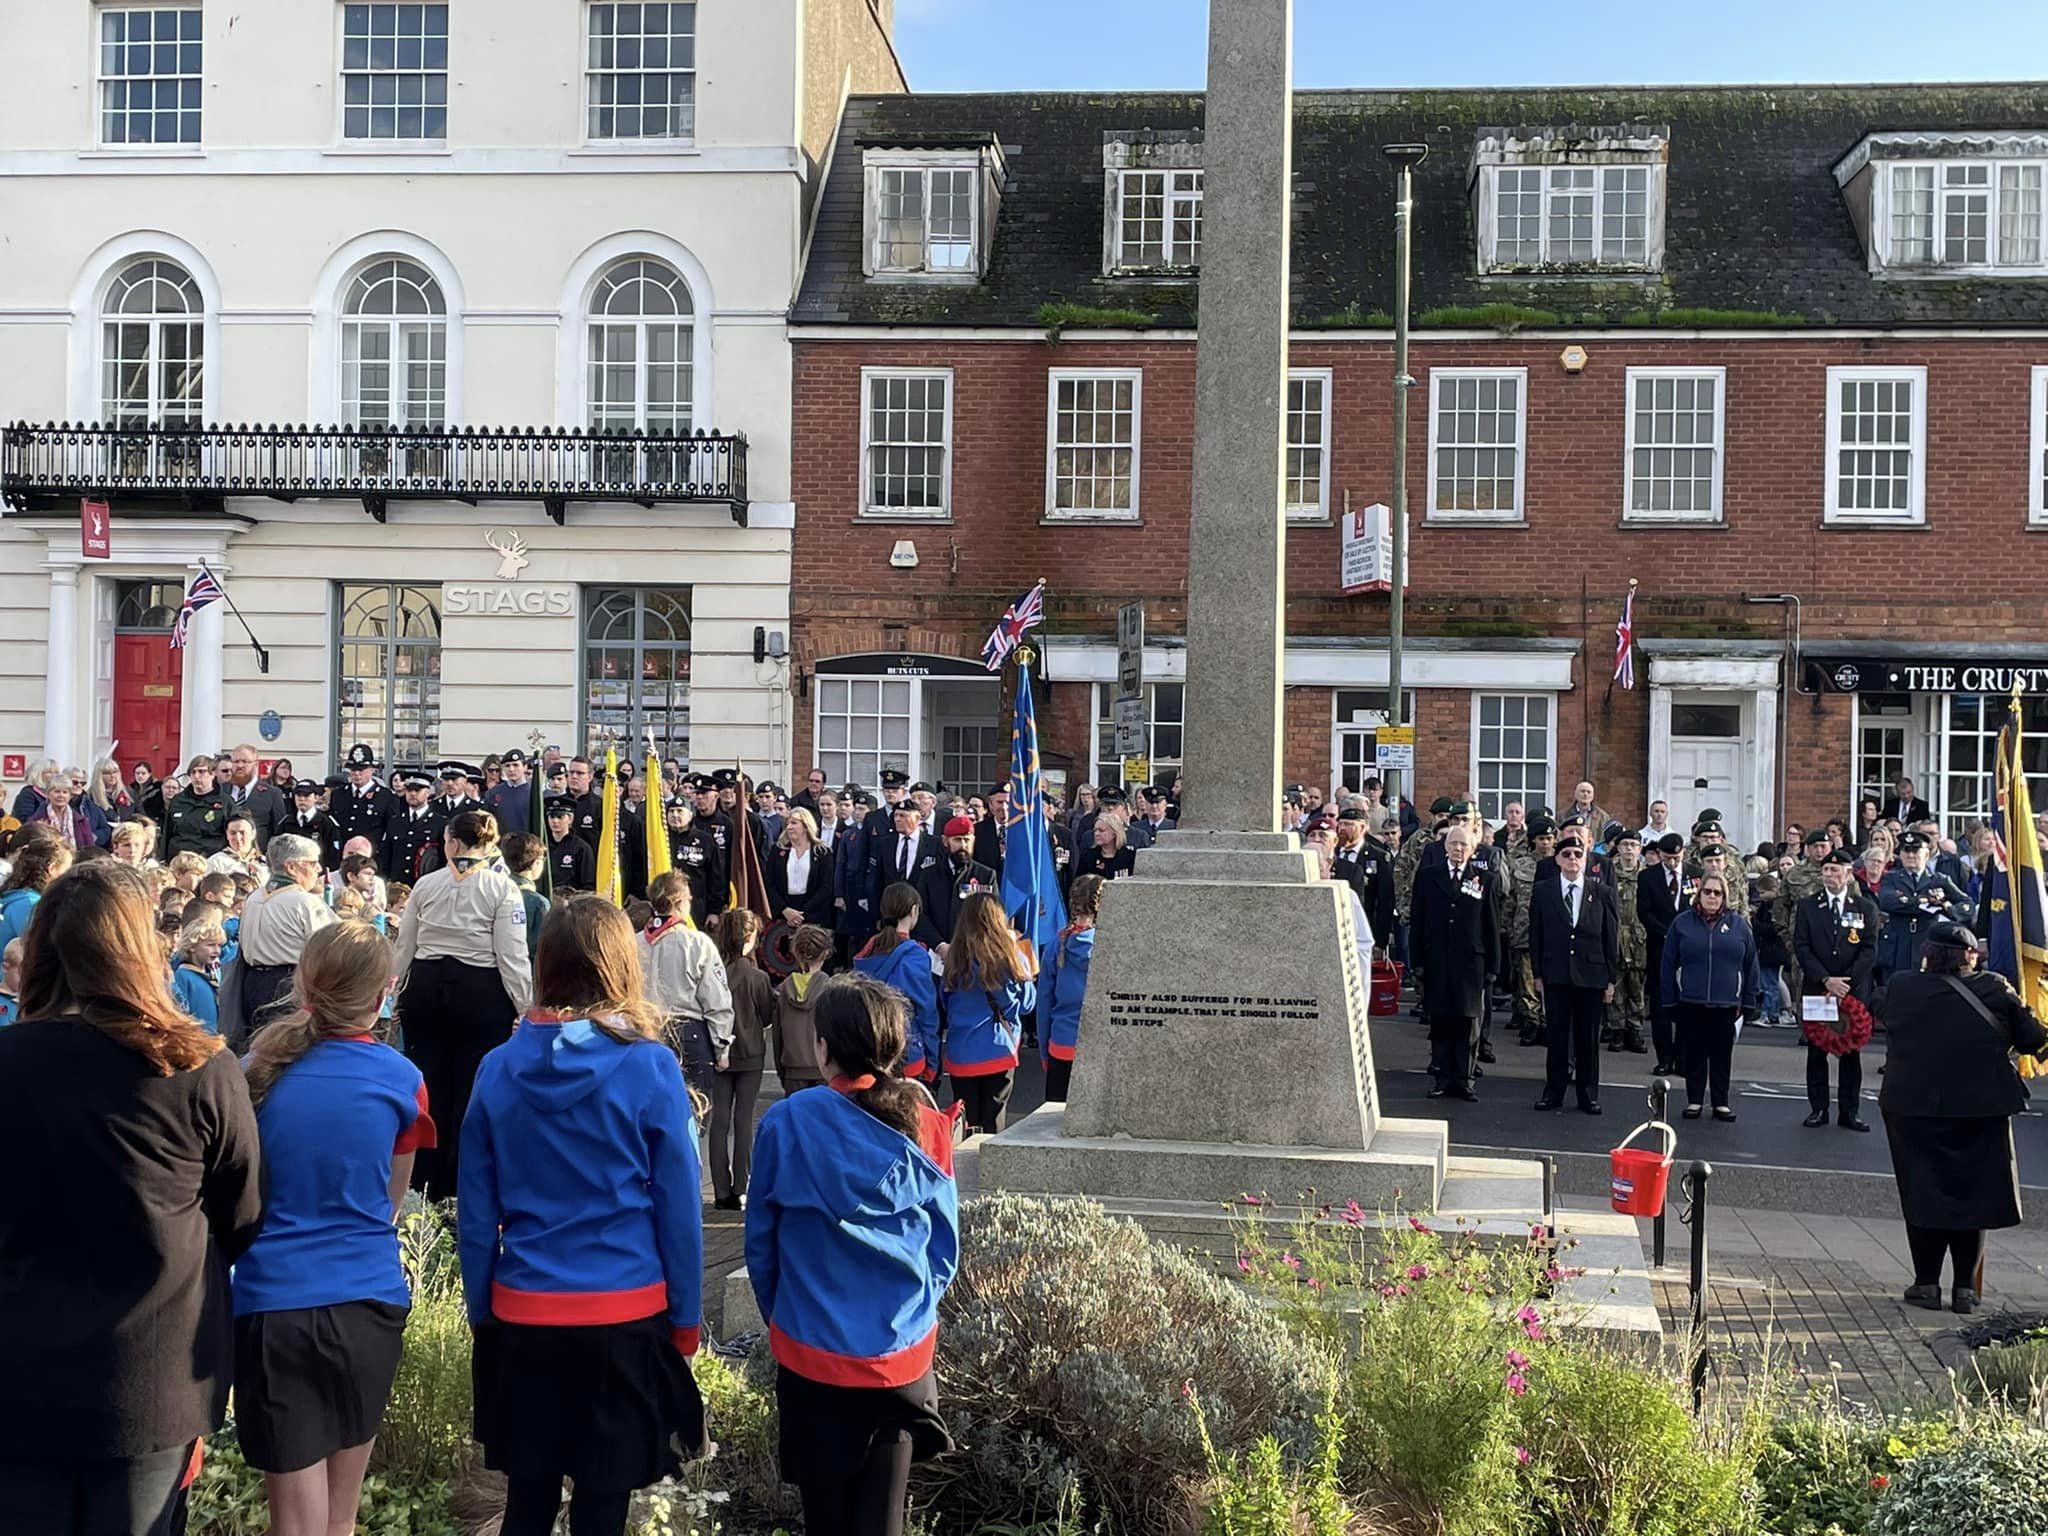 The crowd assembled outside St. Paul's Church (Credit: Honiton British Legion)